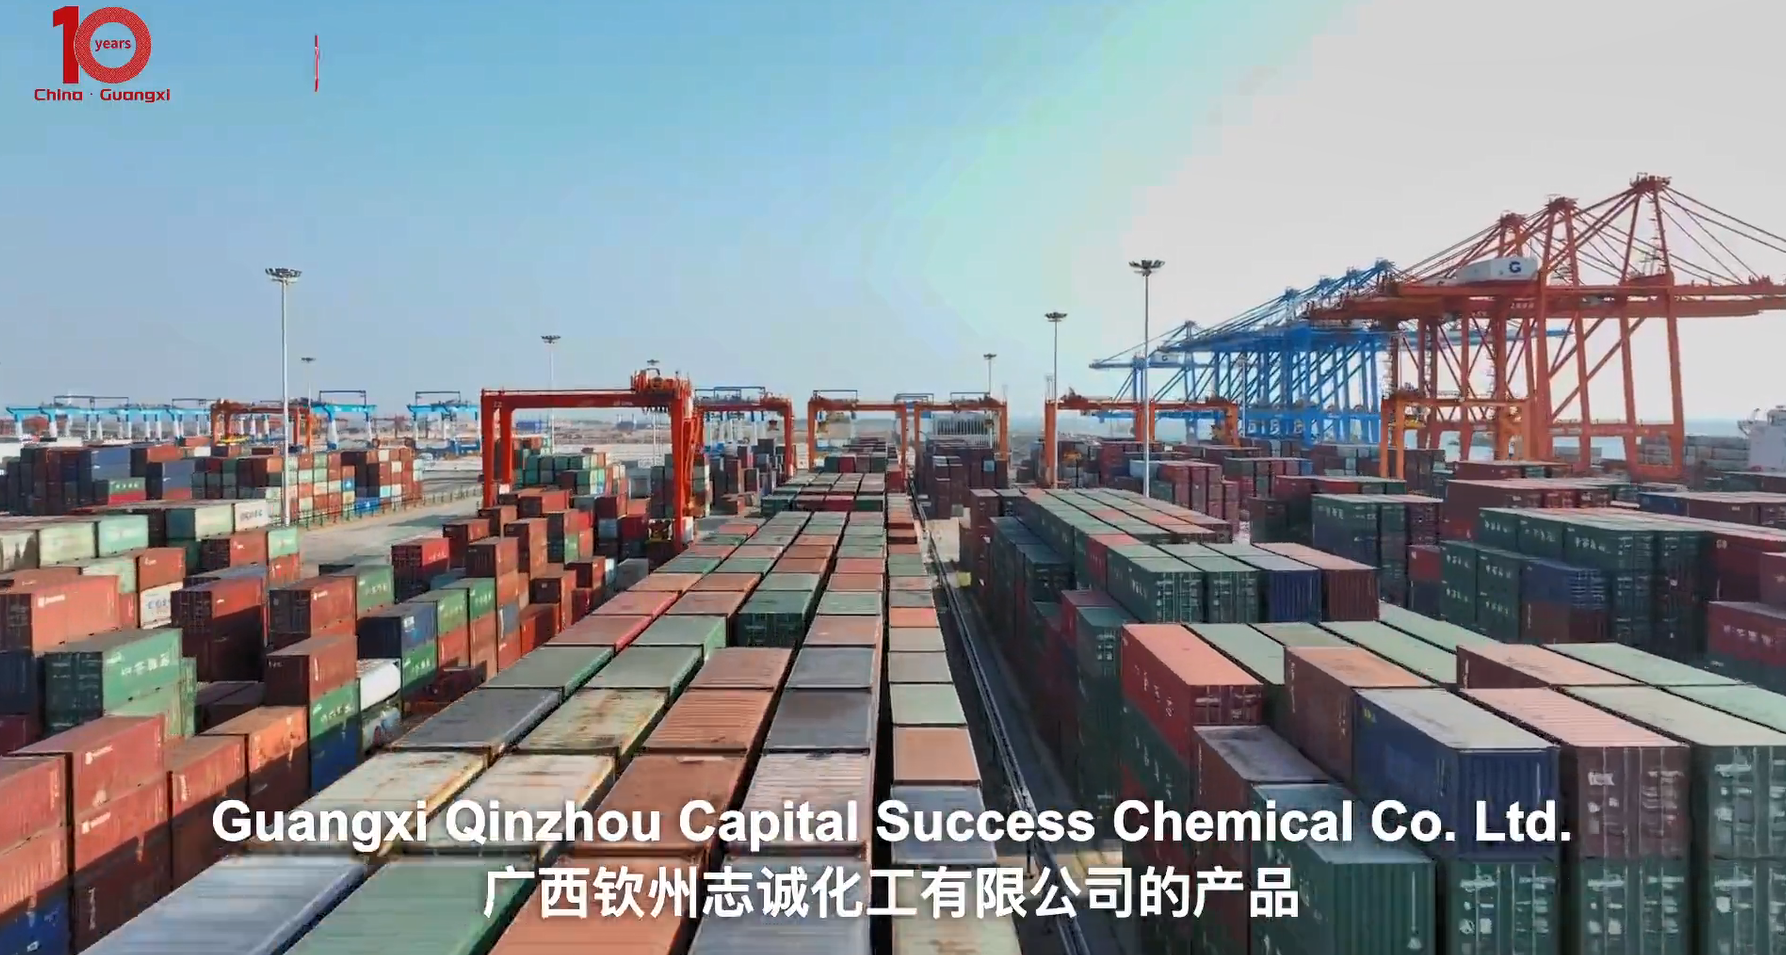 Ten years of Qinzhou Port and Capital Success Chemical growing together